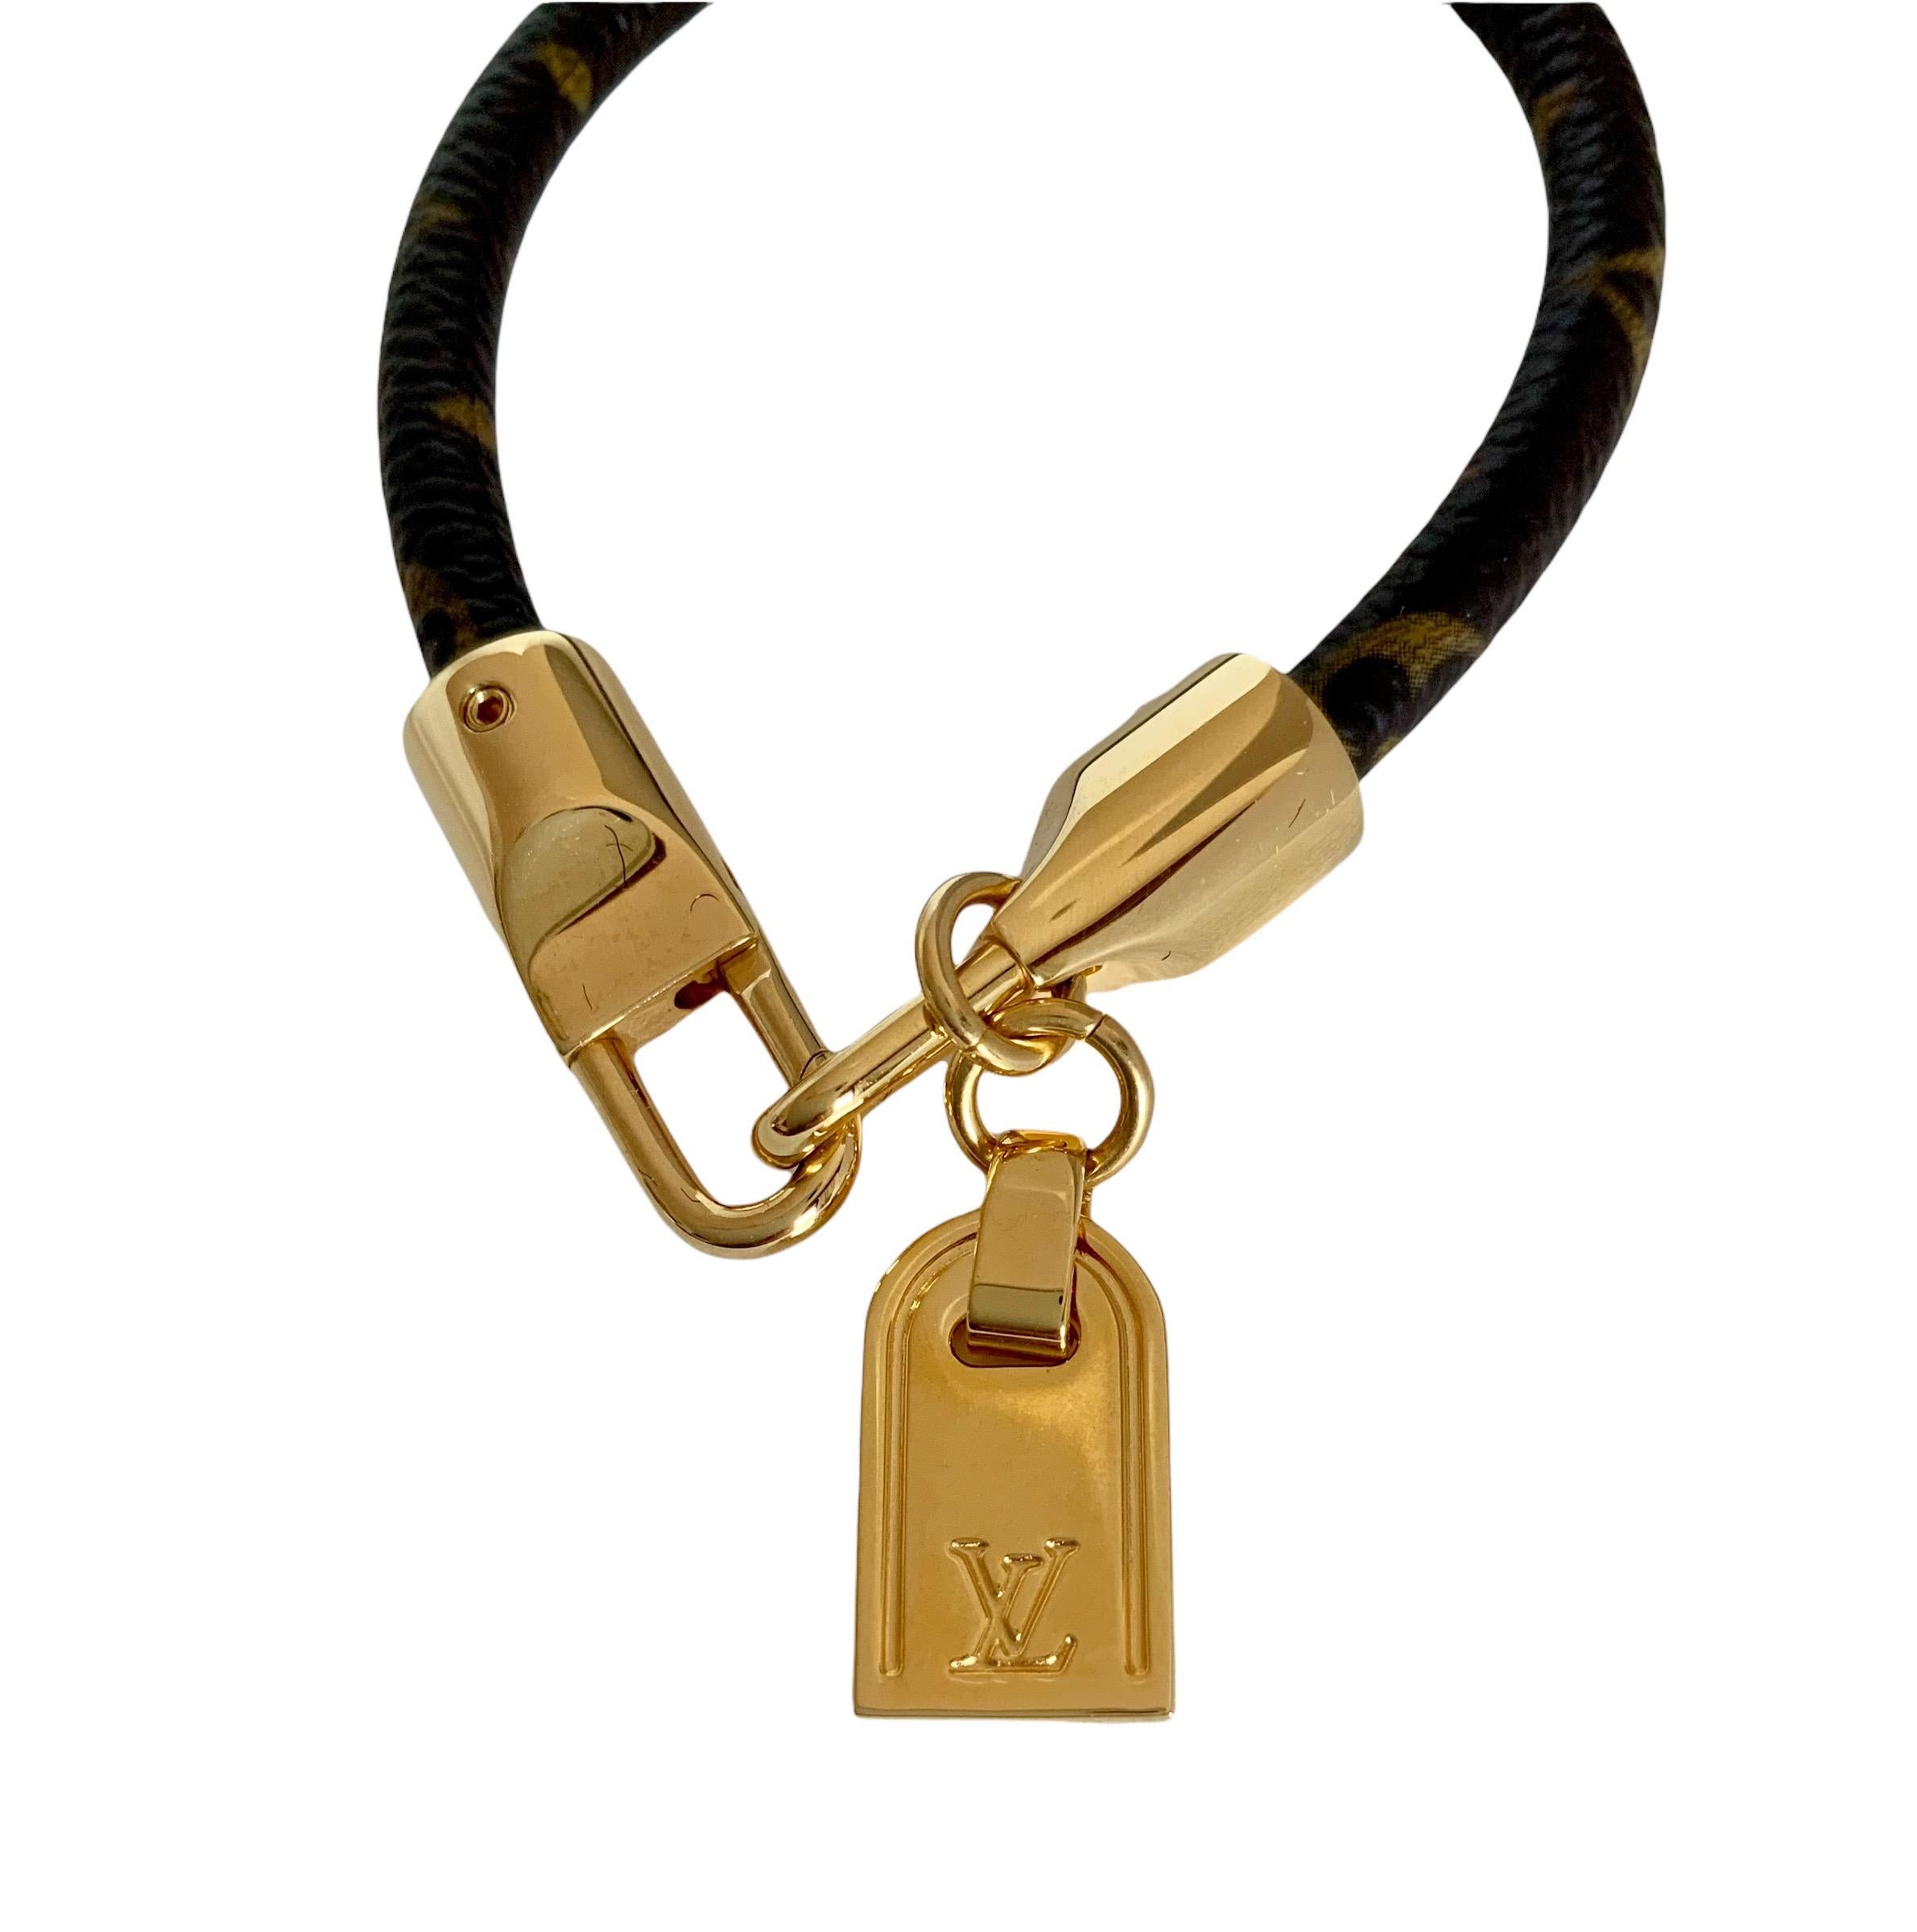 Charming pre-owned Louis Vuitton Crazy in Lock Bracelet.
Crafted in the iconic monogram canvas and gold-tone metal.
LV signature on a charm in the shape of the tag !
Very good condition
Made in Spain
Comes with a LV pouch

All items at la Bourse du